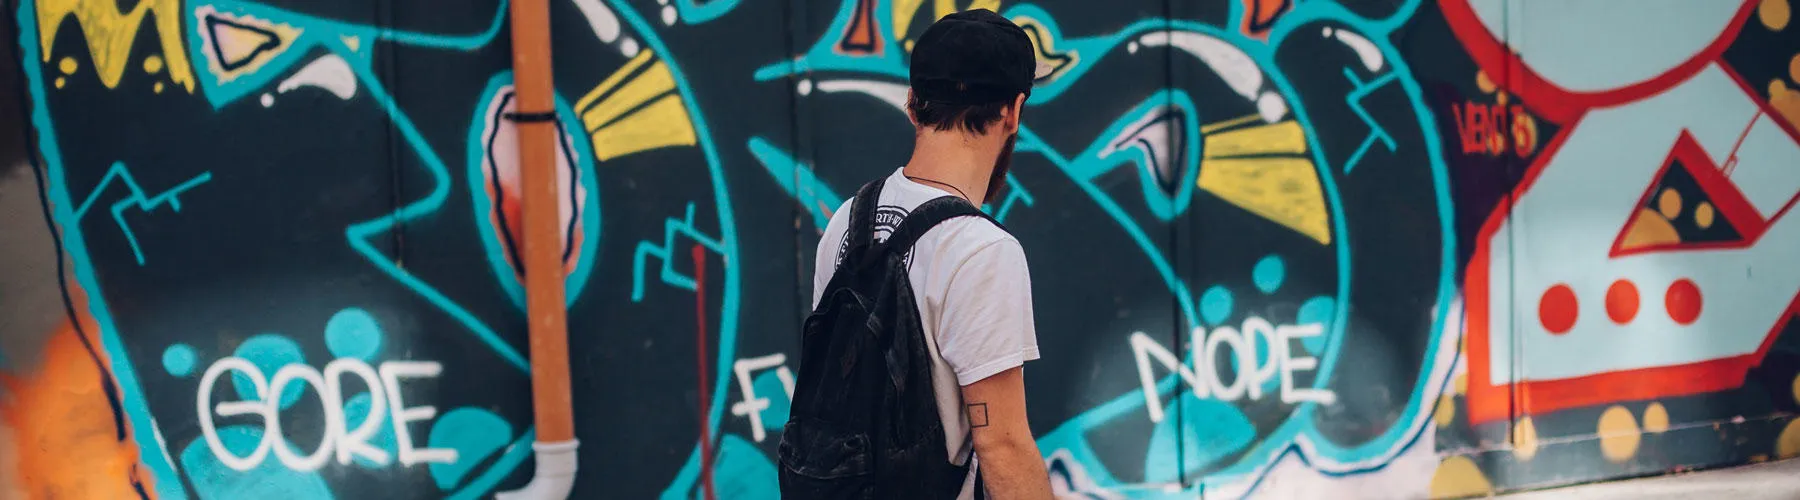 Man with backpack standing in front of graffiti wall